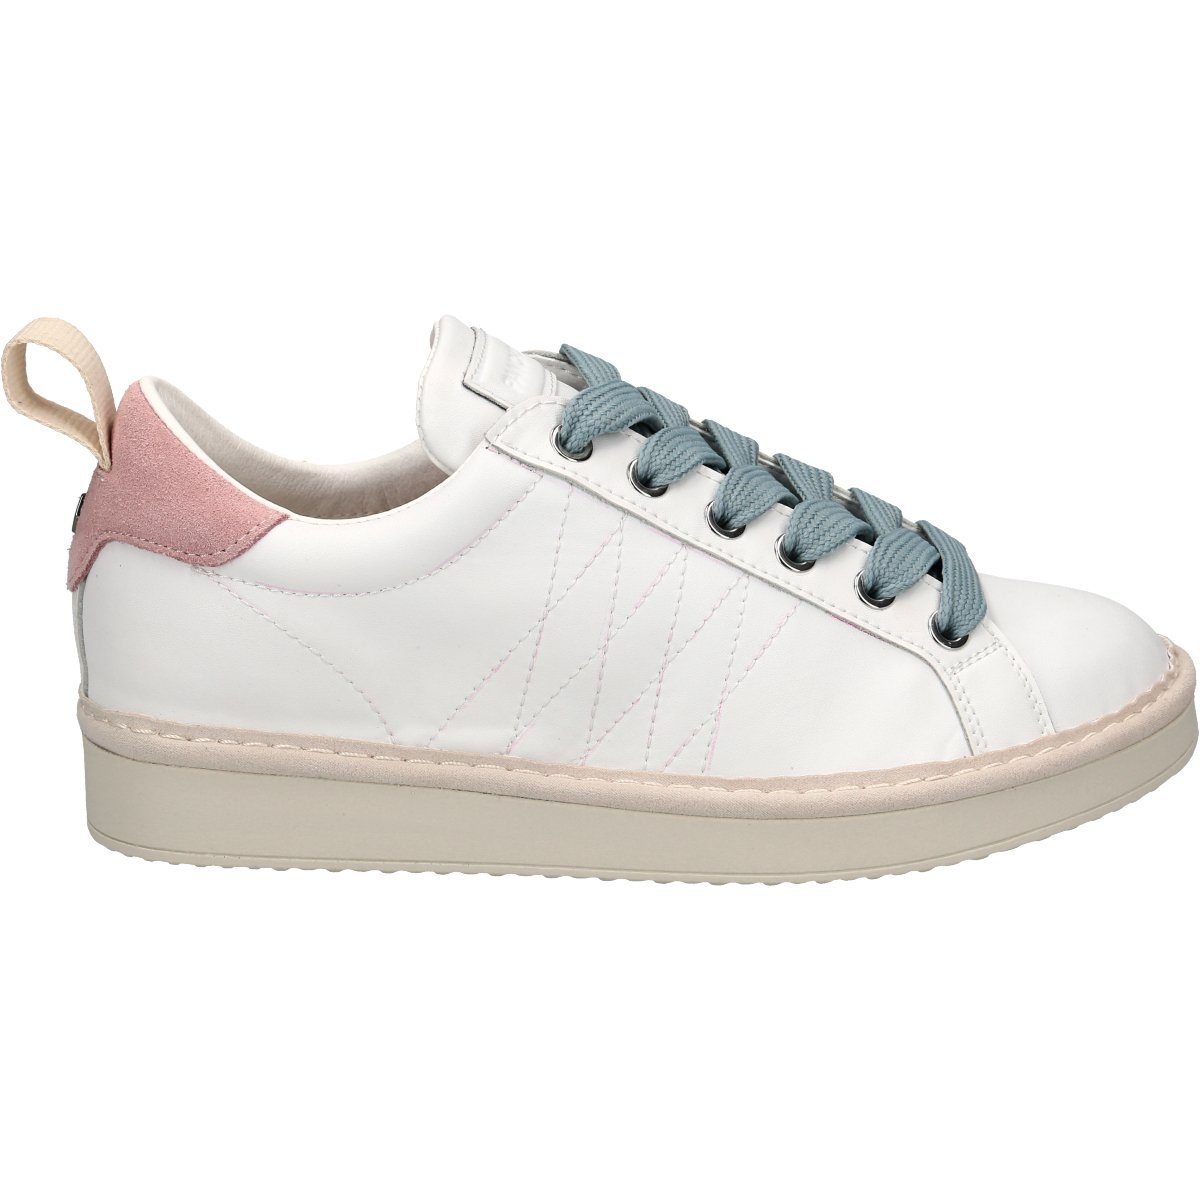 Lace-up A01T03 PAN Sneaker